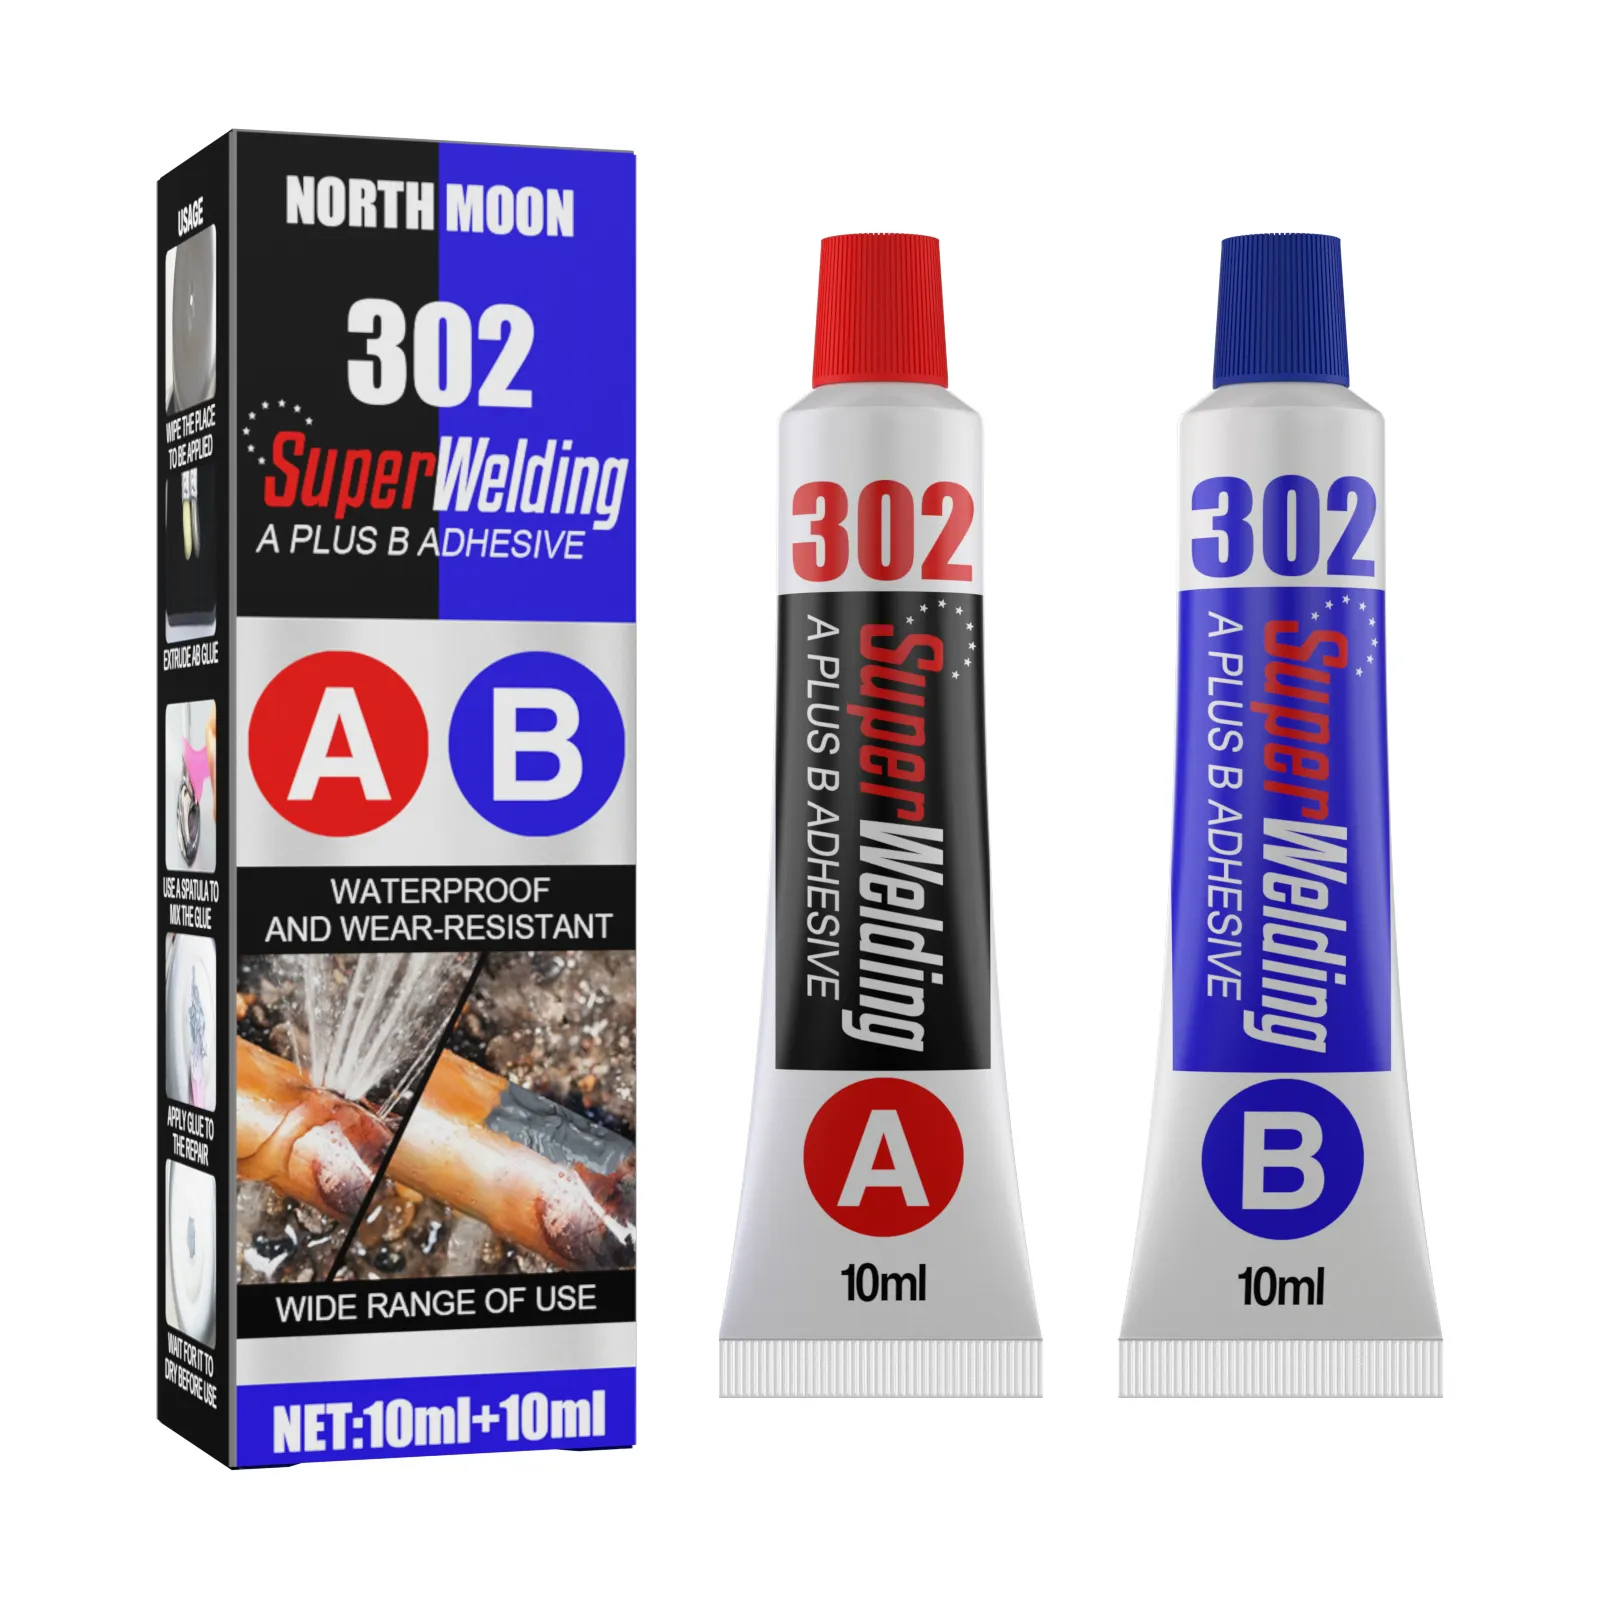 20ml AB Glue Iron Stainless Steel Glass Plastic Wood Ceramic Marble Quick Drying Metal Repair Structural Adhesives